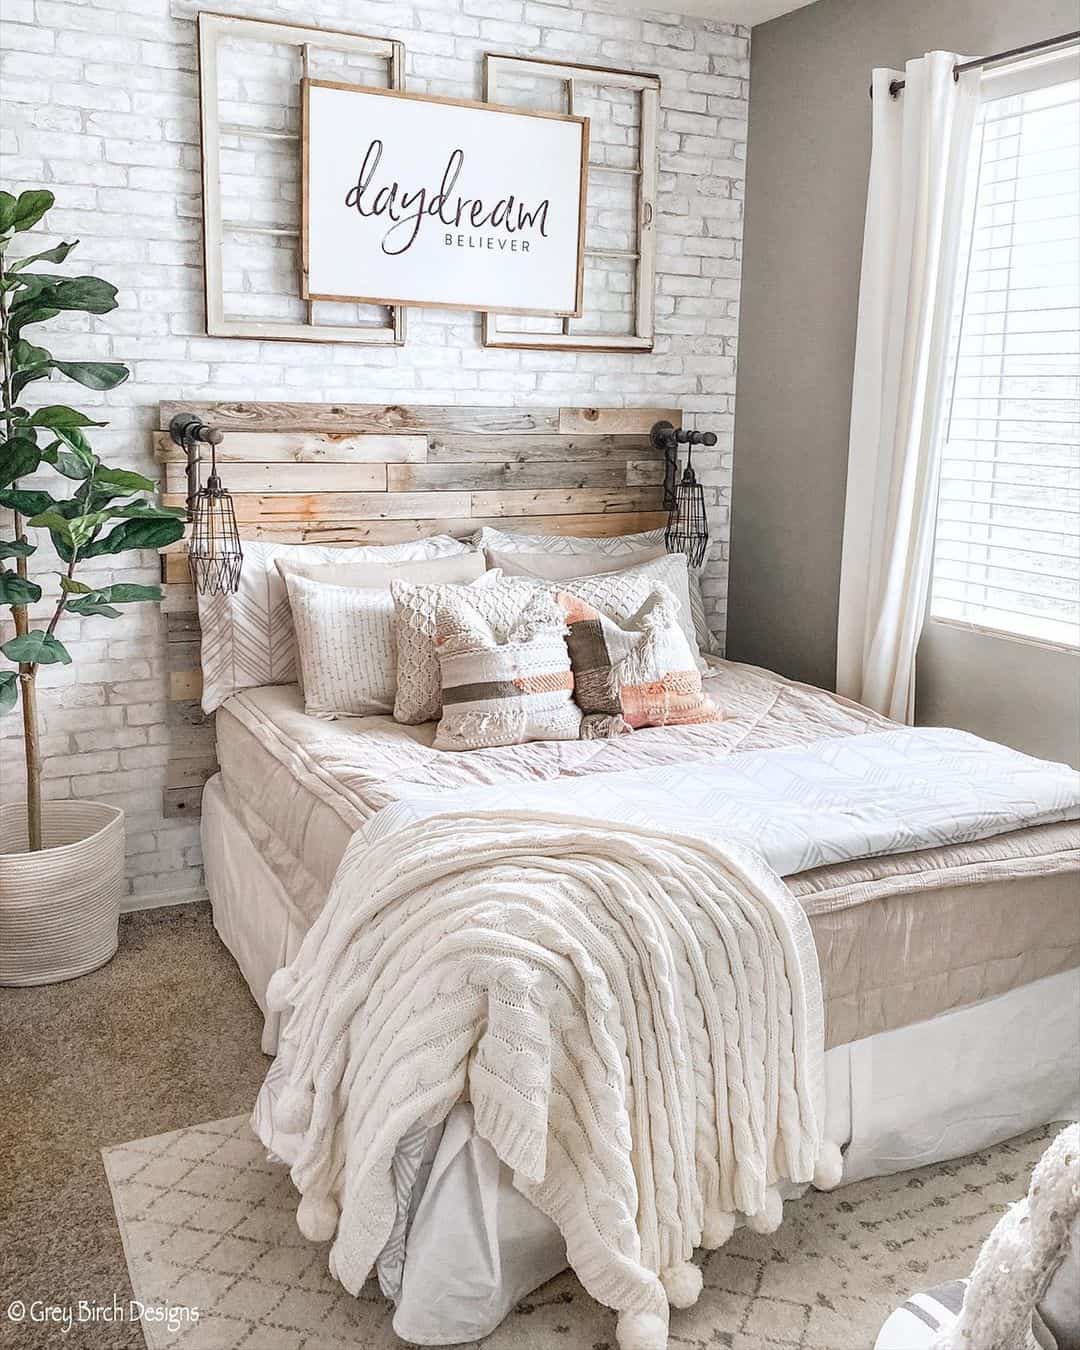 White Wall Decor for a Bedroom on a Brick Wall - Soul & Lane